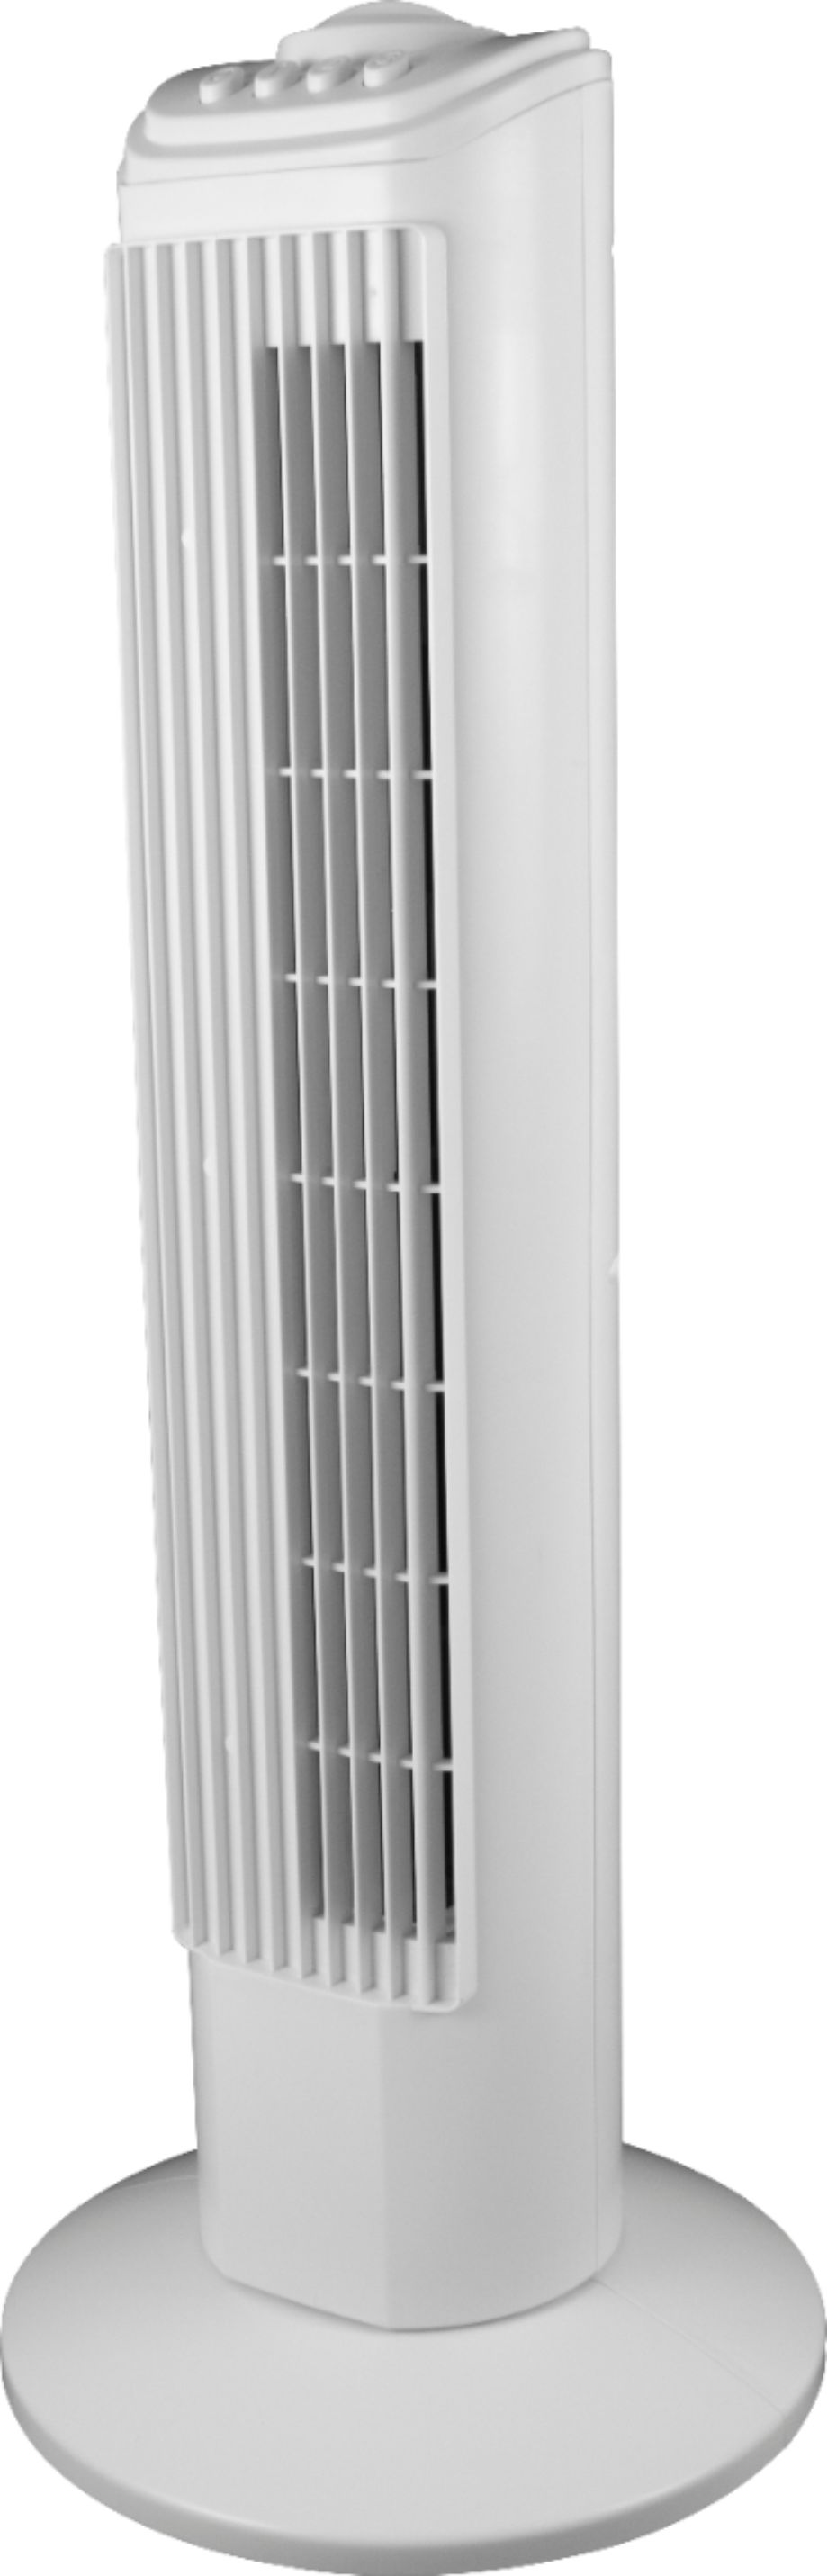 Left View: NewAir - Hardwired Electric Garage Heater, Ceiling Mounted with Adjustable Louvers and Tilt Head, Heats up to 500 sq. ft. - Ivory